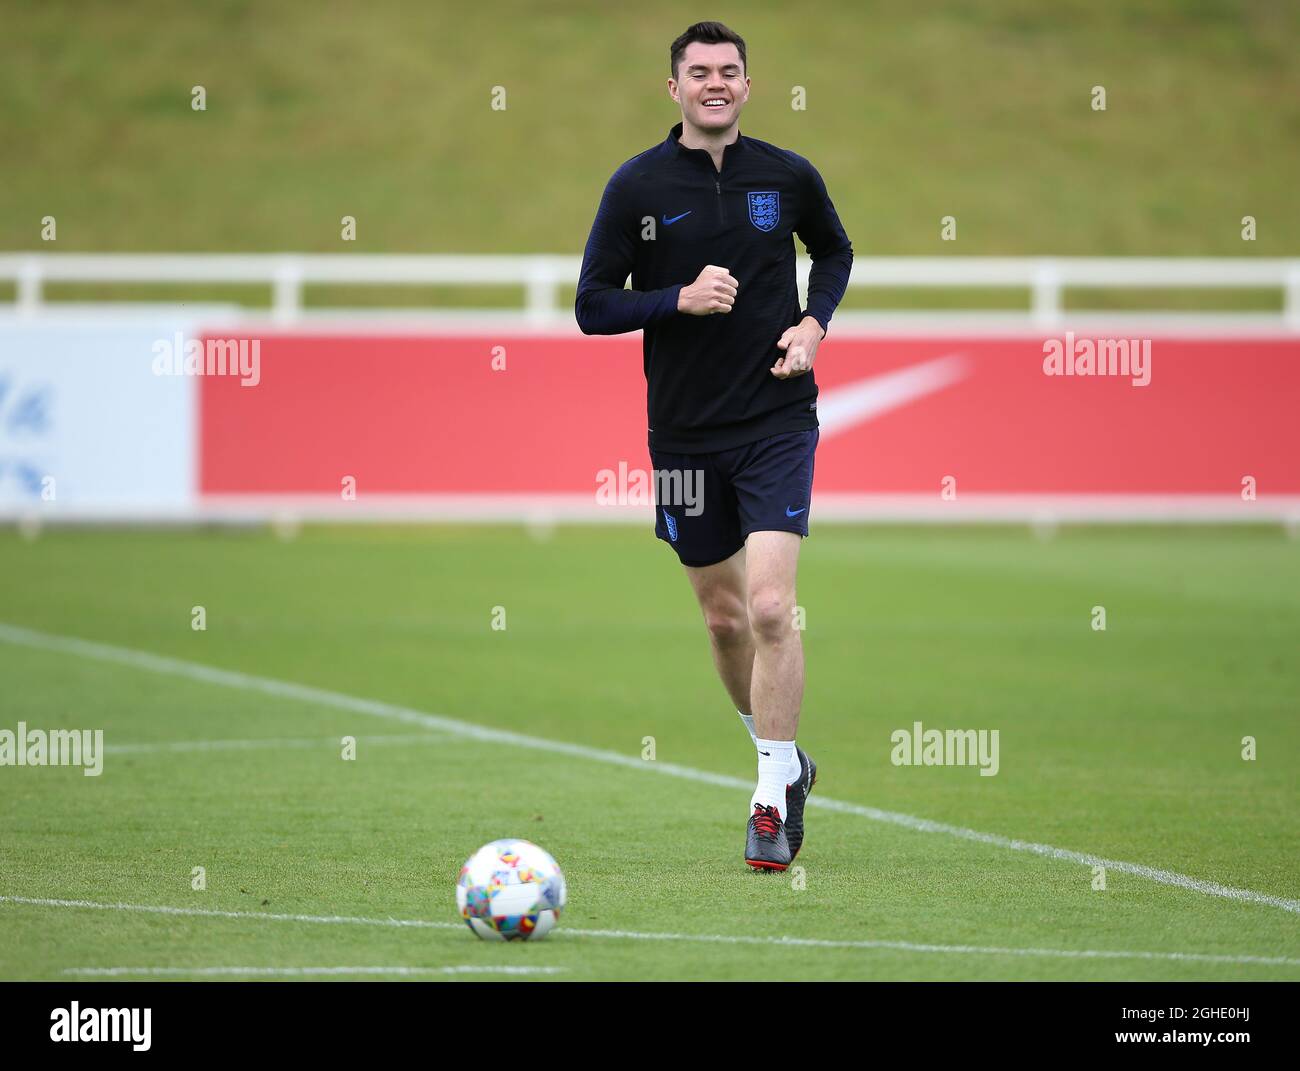 Michael Keane of Engalnd during the England training session at St George's Park, Burton on Trent. Picture date: 28th May 2019. Picture credit should read: Nigel French/Sportimage via PA Images Stock Photo